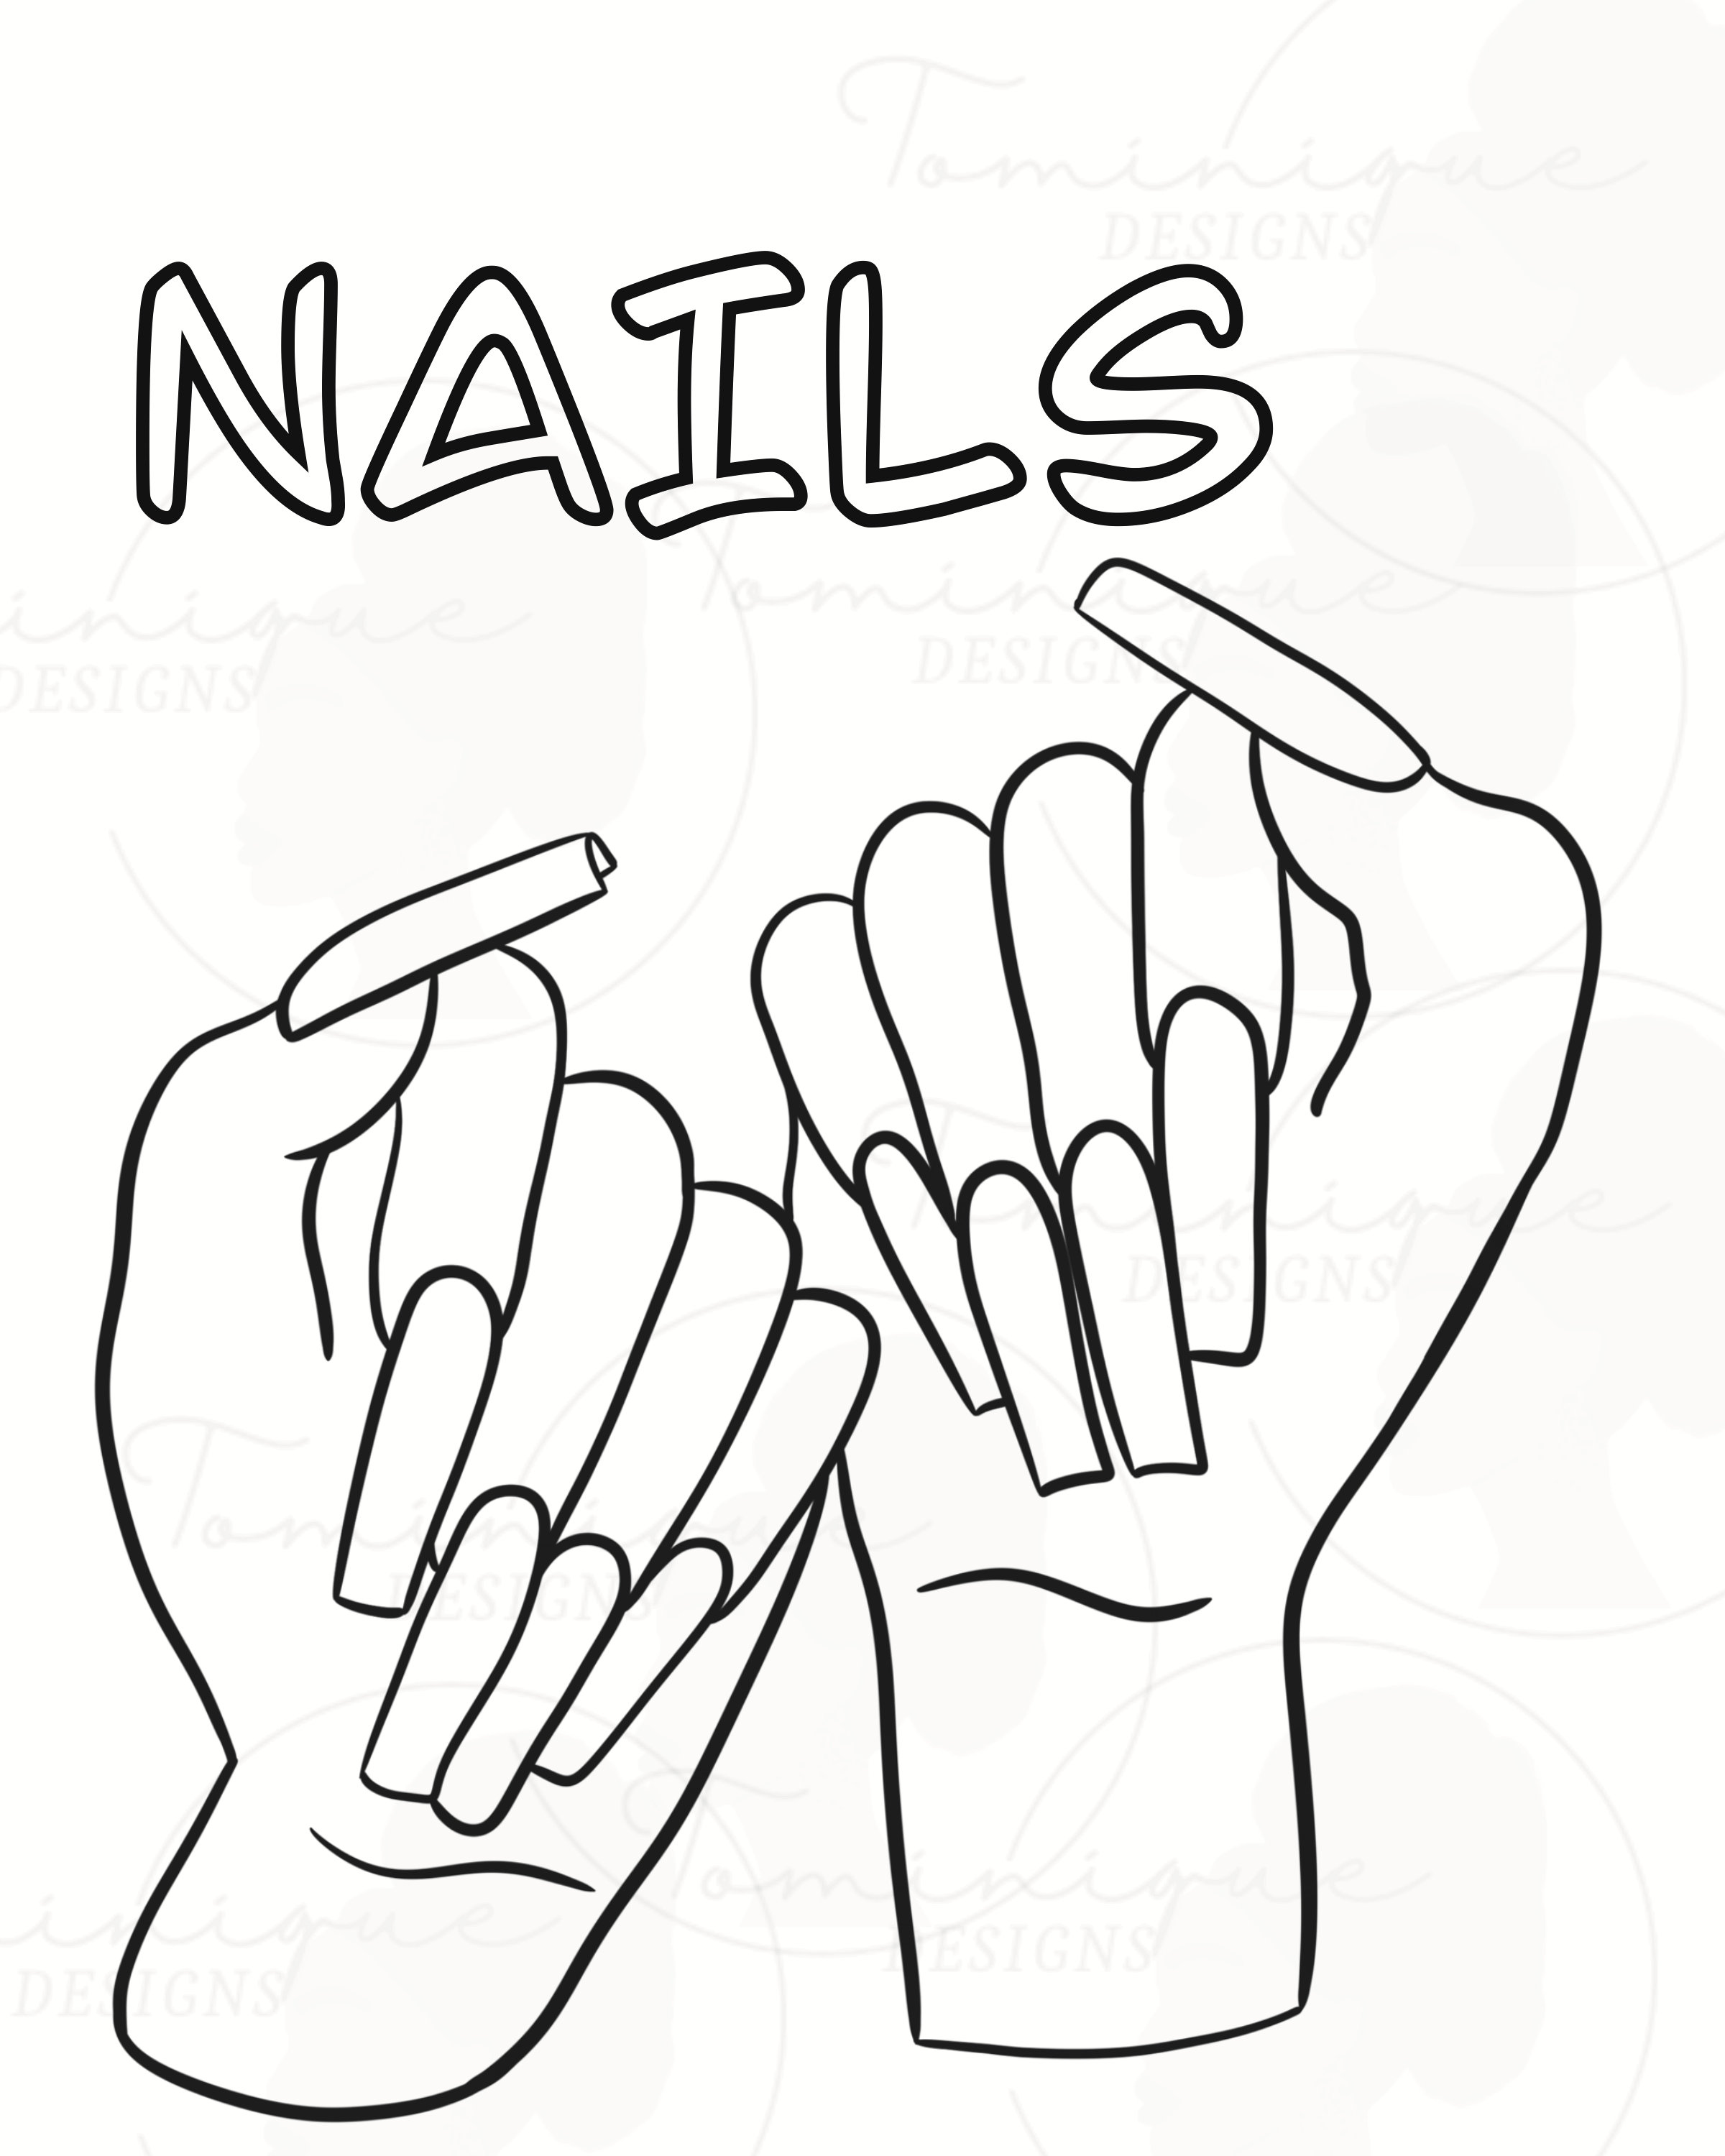 Nails Coloring Page, Paint and Sip Art - Etsy